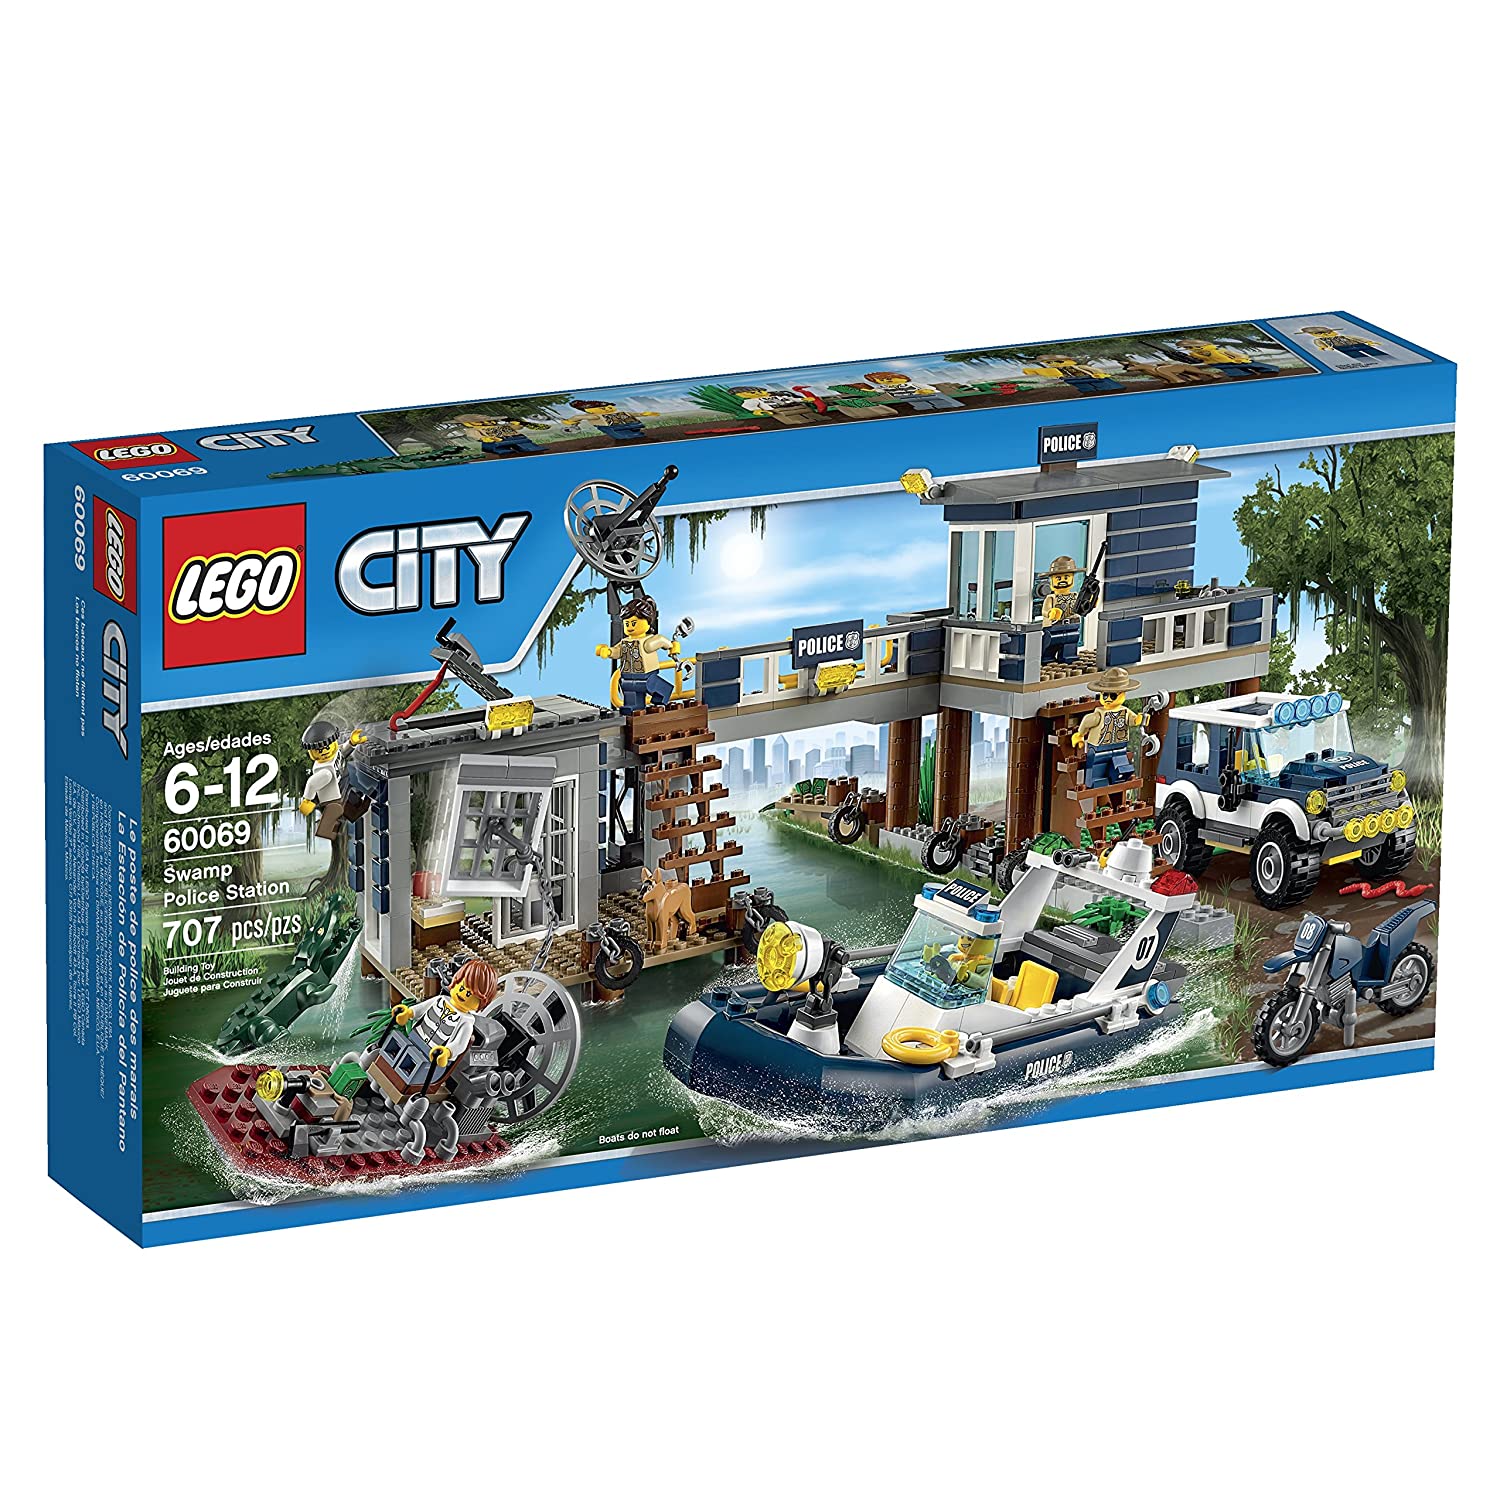 9 Best LEGO Police Station Set 2023 - Buying Guide & Reviews 5